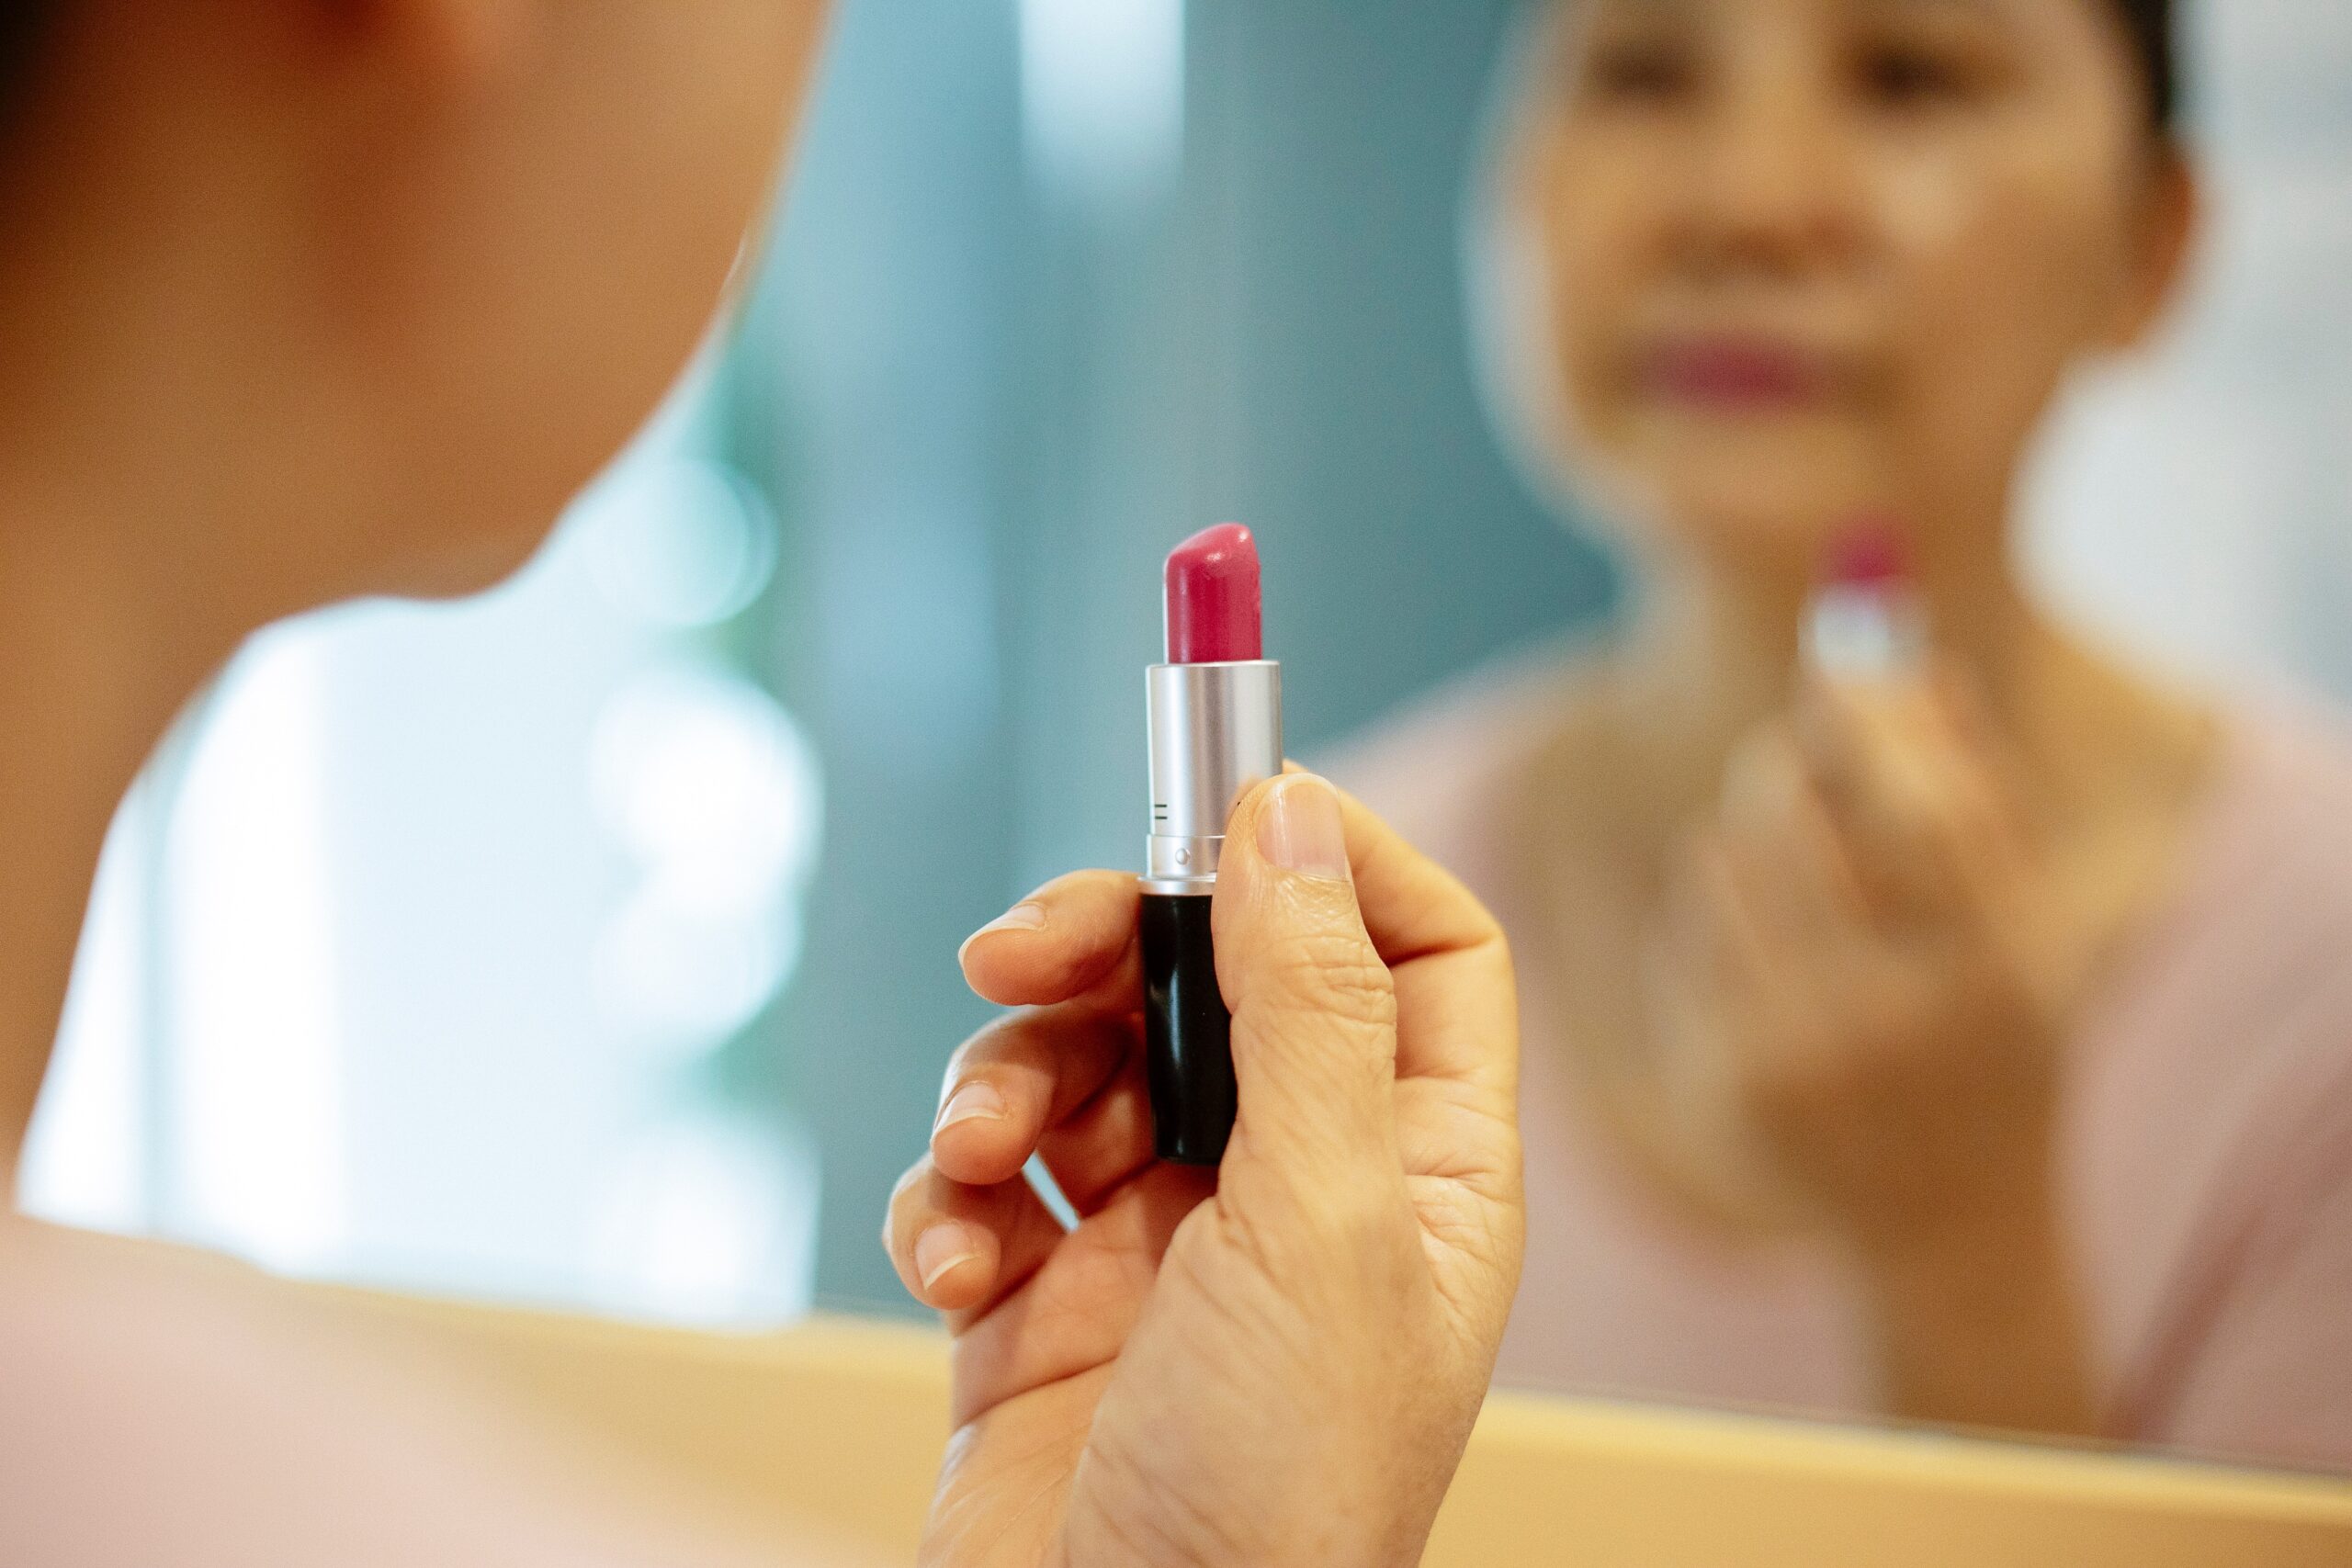 lady-applying-lipstick-while-looking-at-mirror-reflection-at-home